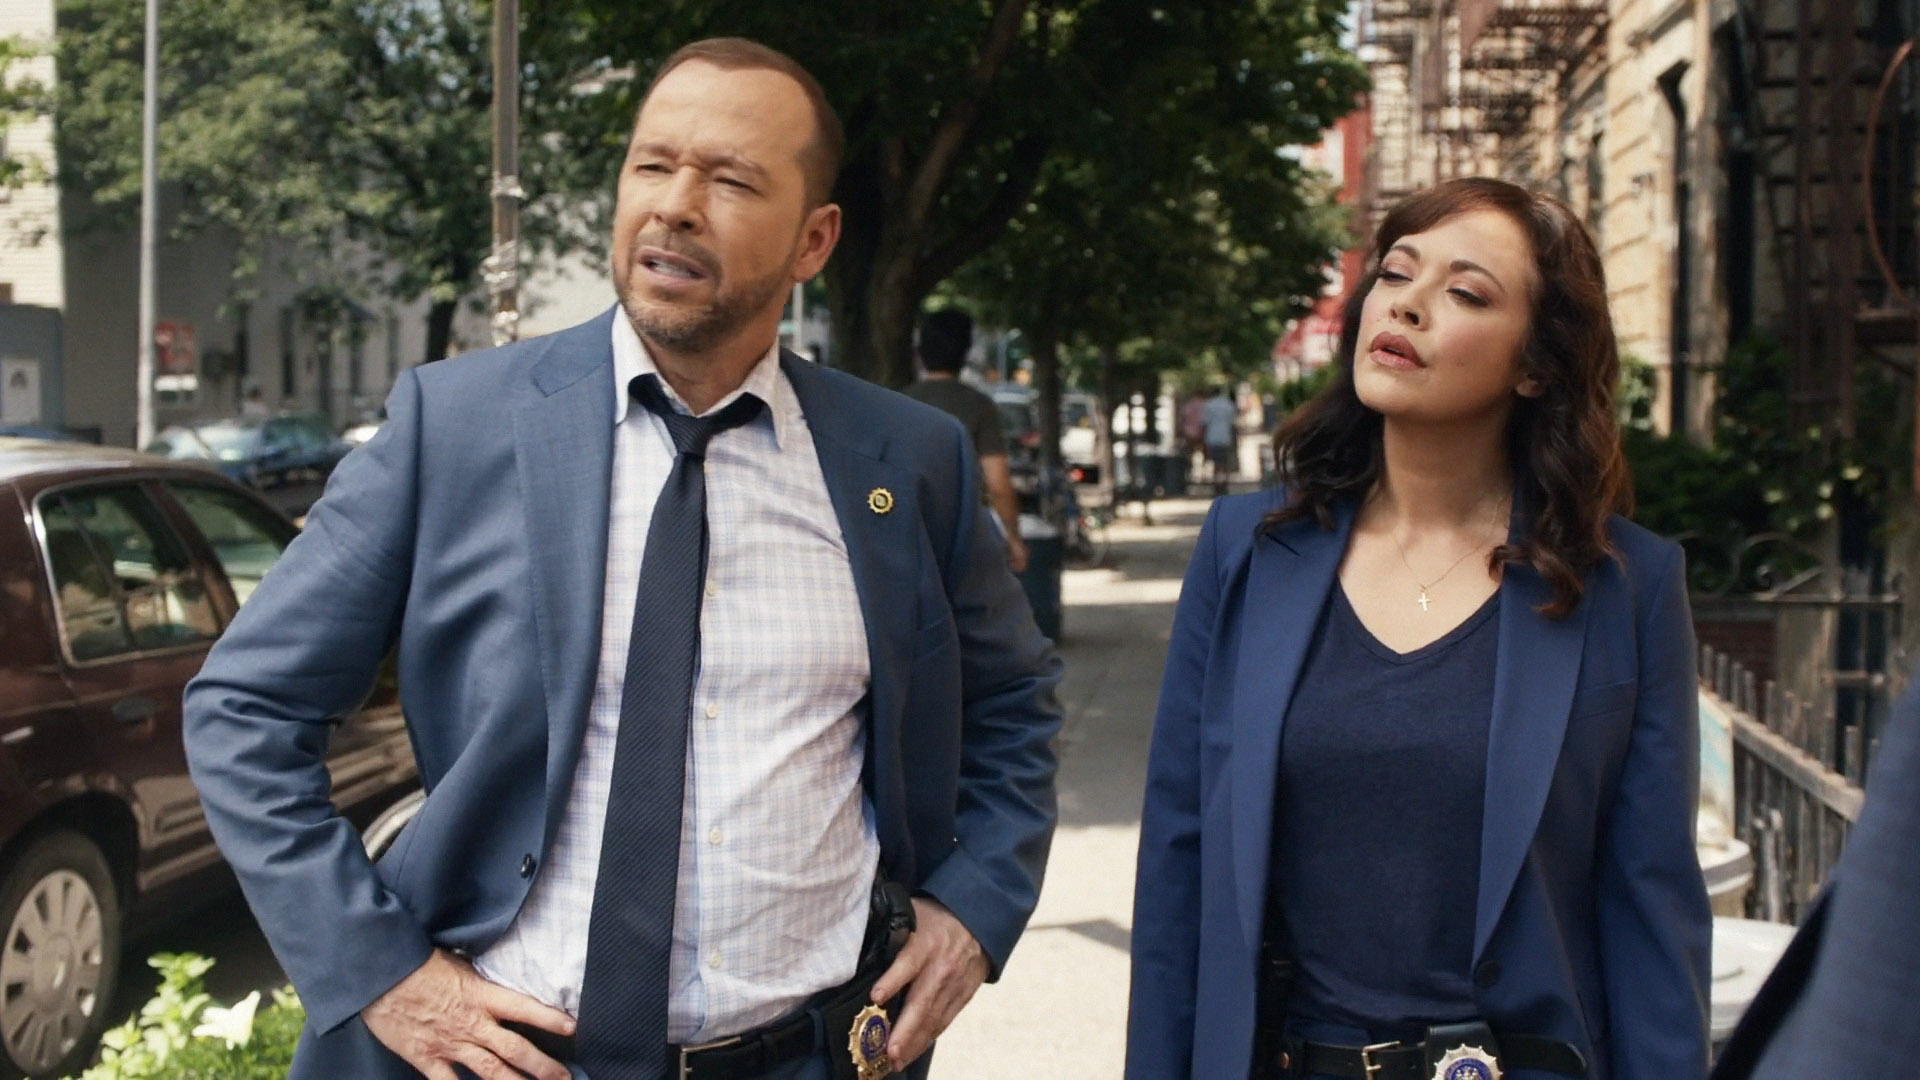 Season 13 Wrap Video Has Blue Bloods Fans Yearning for Daez – Again